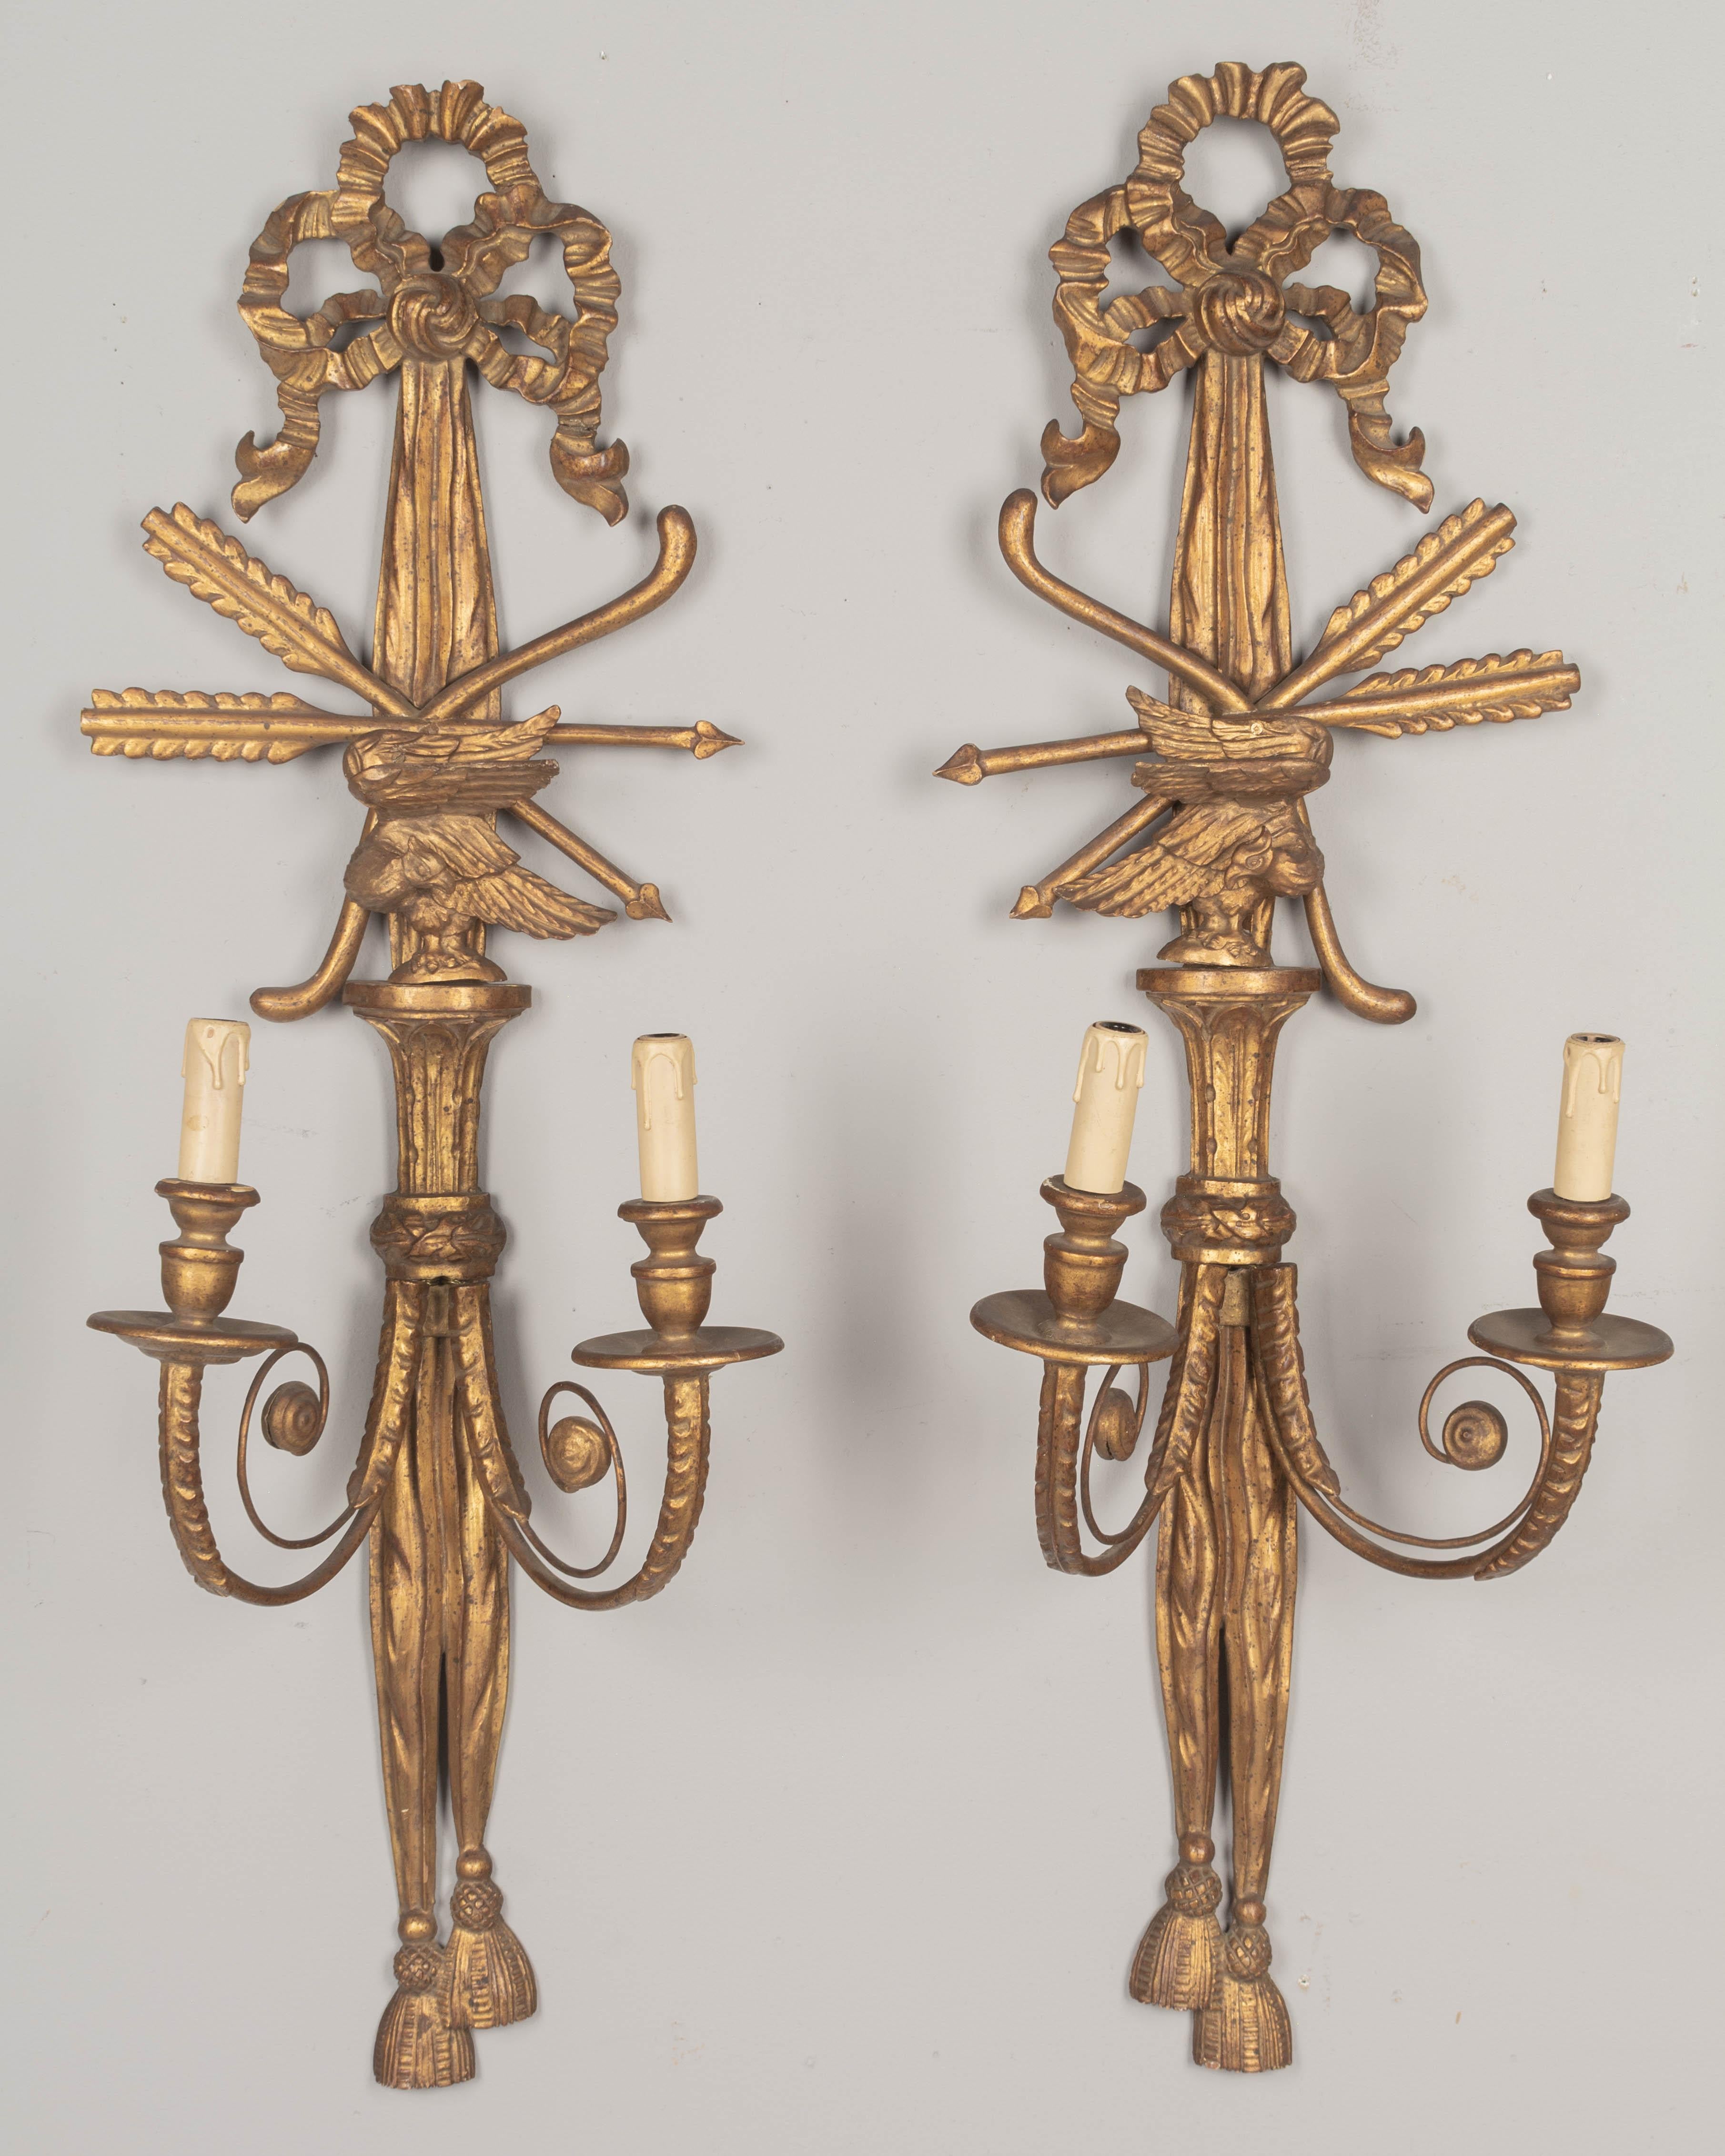 A pair of Italian two-light gilded wood sconces, each with carved draped tassels and ribbon, and three-dimensional bird. In good condition with warm gilt patina. Two scrolling metal candle arms with tôle details and original candle covers. Rewired